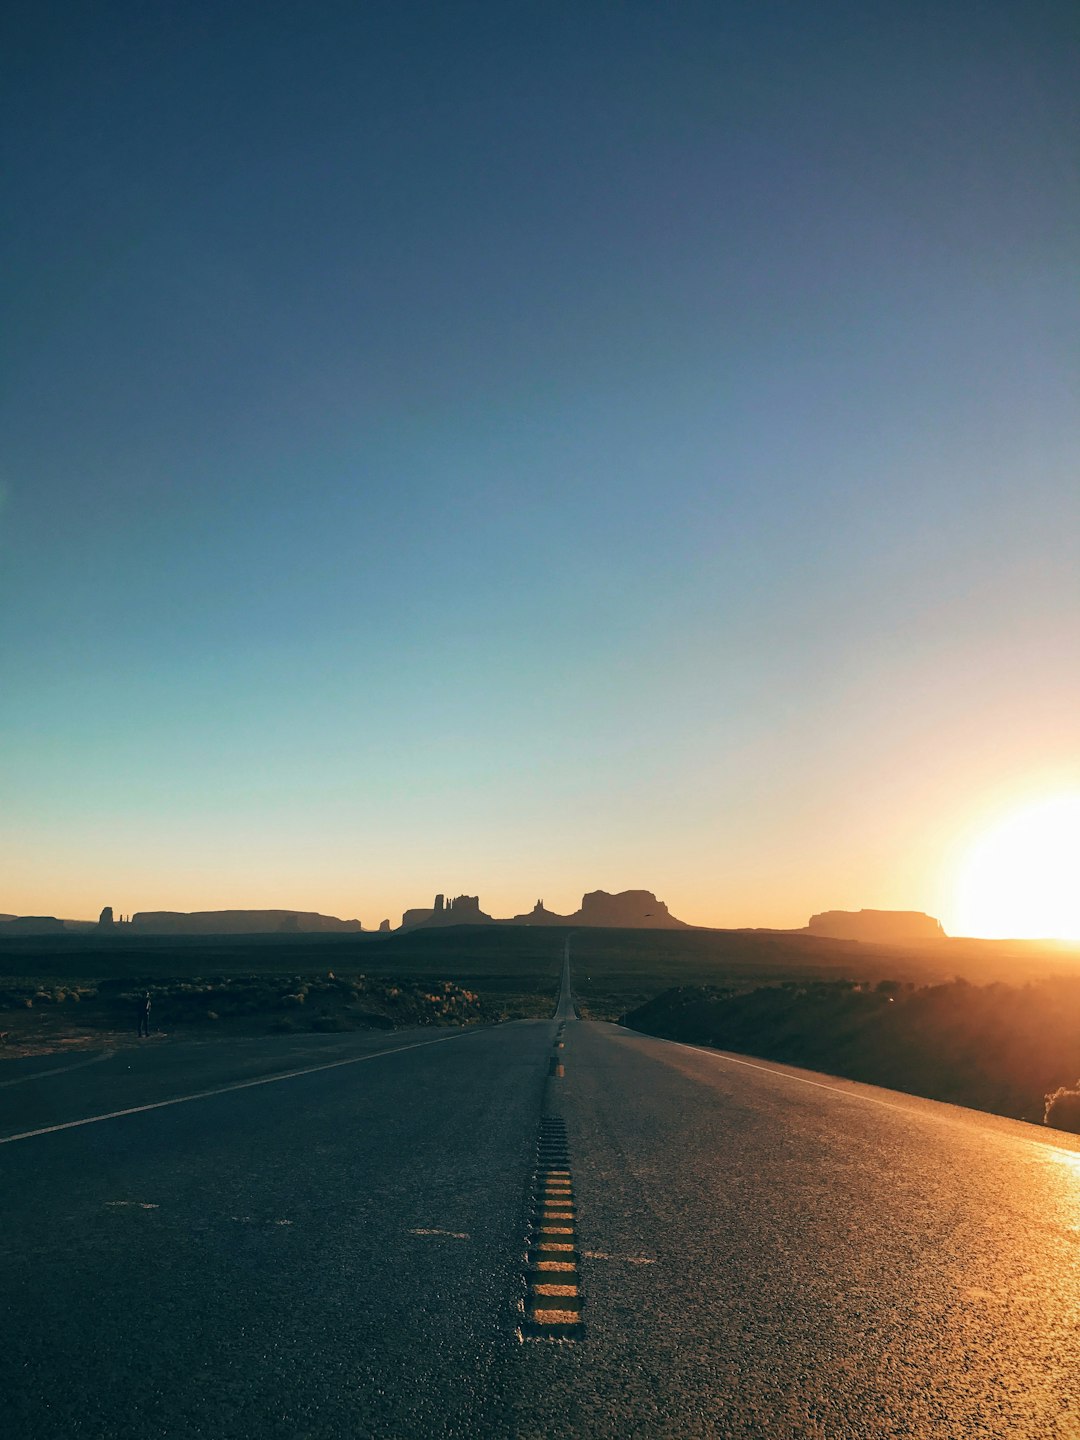 travelers stories about Road trip in Oljato-Monument Valley, United States